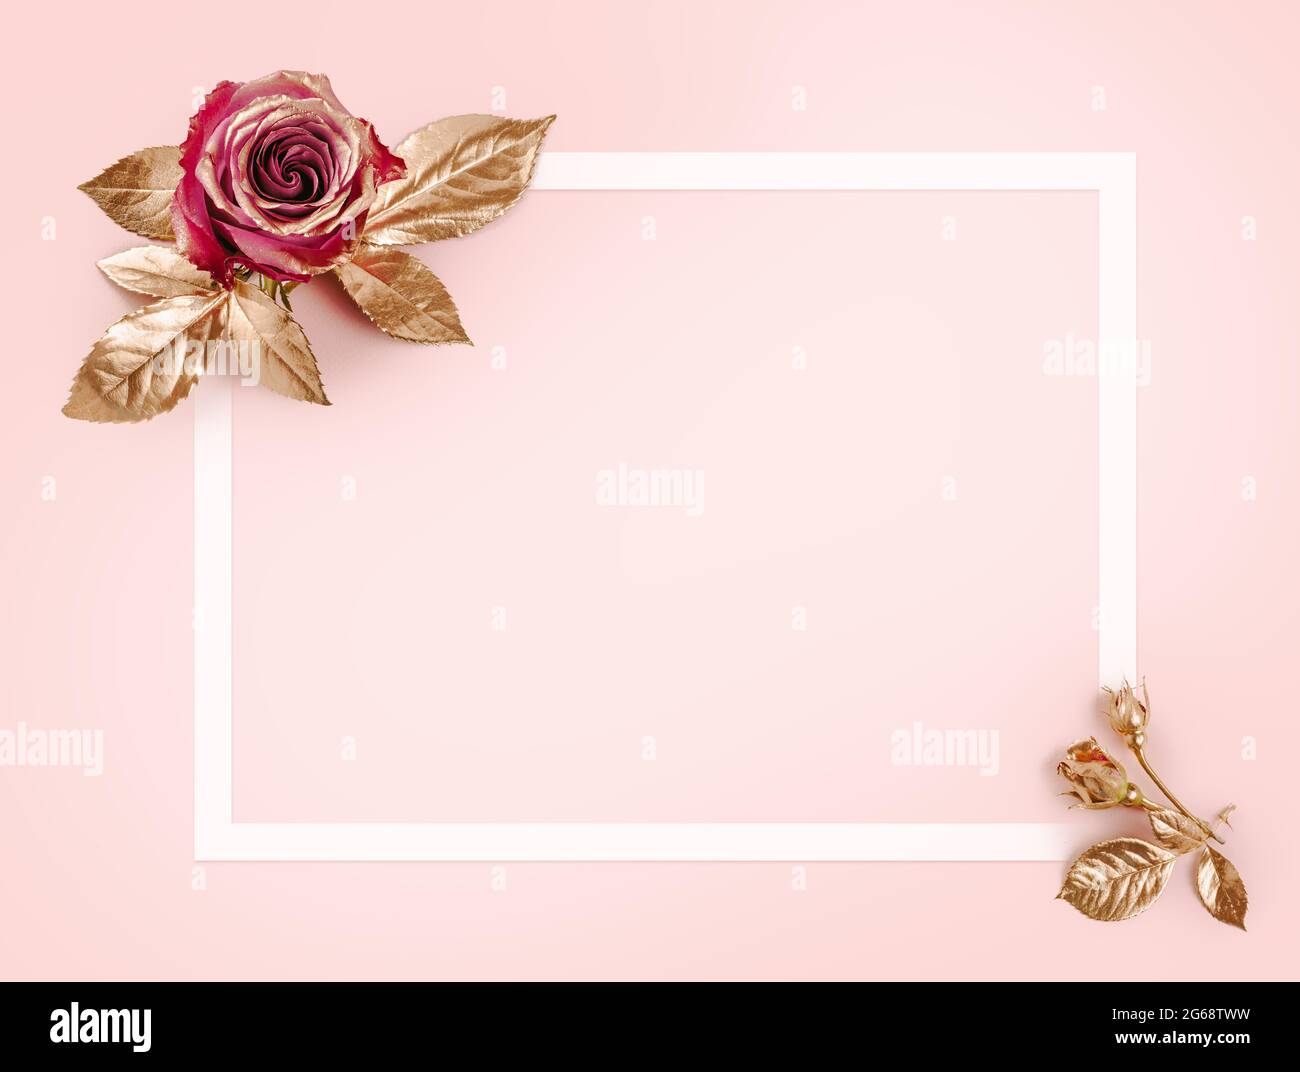 Greeting card template. Top view flat lay with copy space. Gold rose with golden leaves on pink background. Gold rose flower. Stock Photo